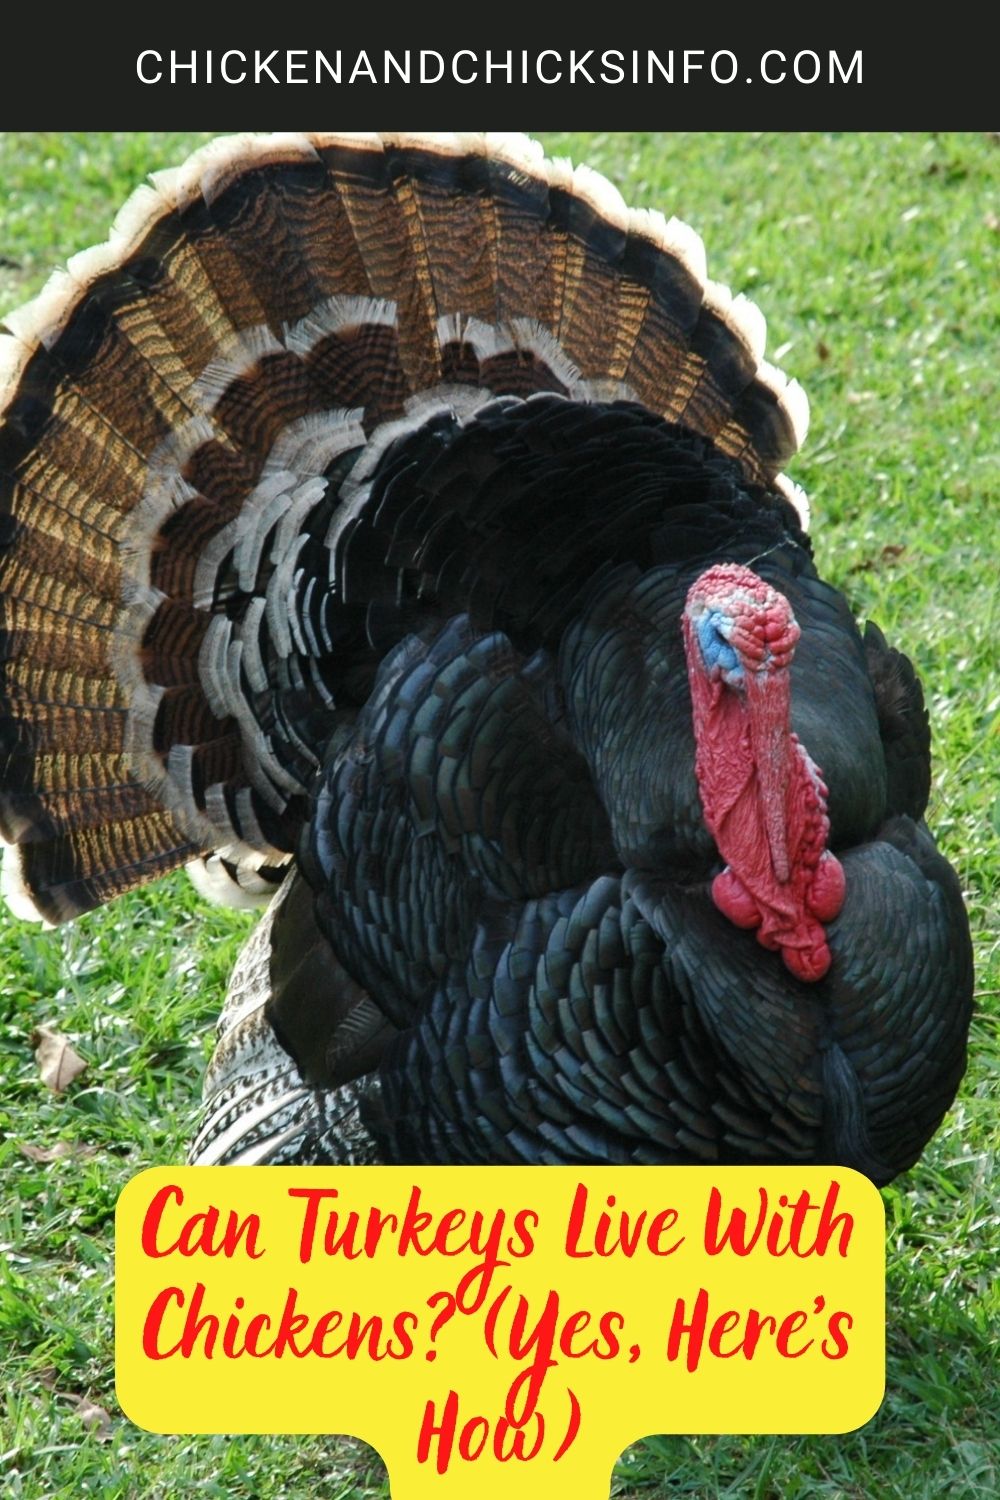 Can Turkeys Live With Chickens? (Yes, Here's How) poster.
